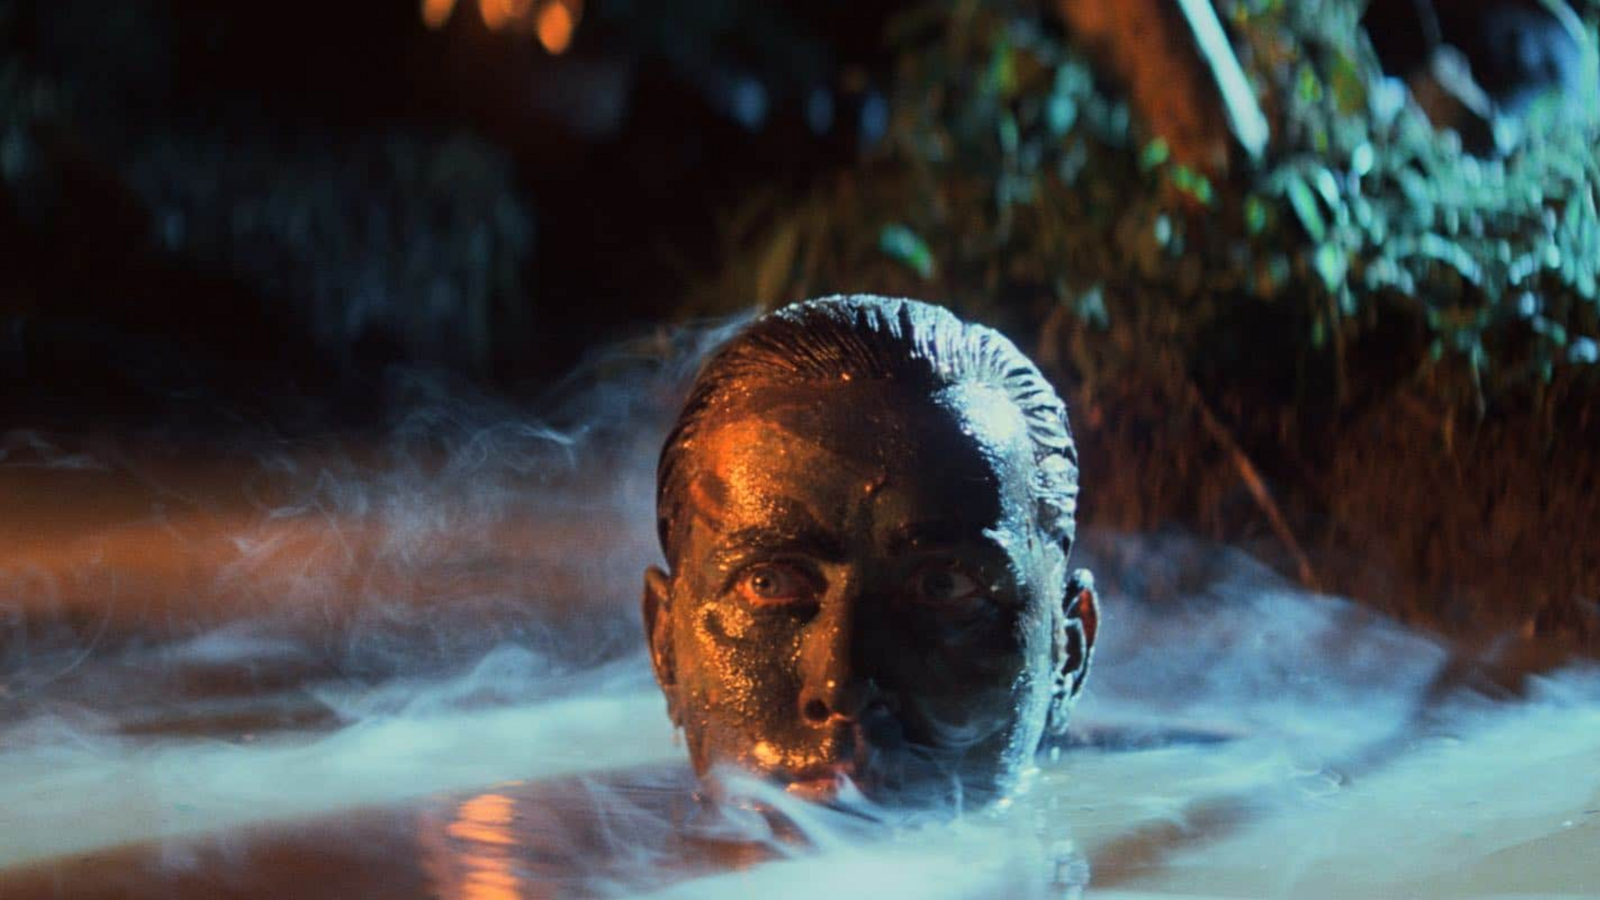 Martin Sheen as Captain Willard before slaying Colonel Kurtz in Francis Ford Coppola's Apocalypse Now